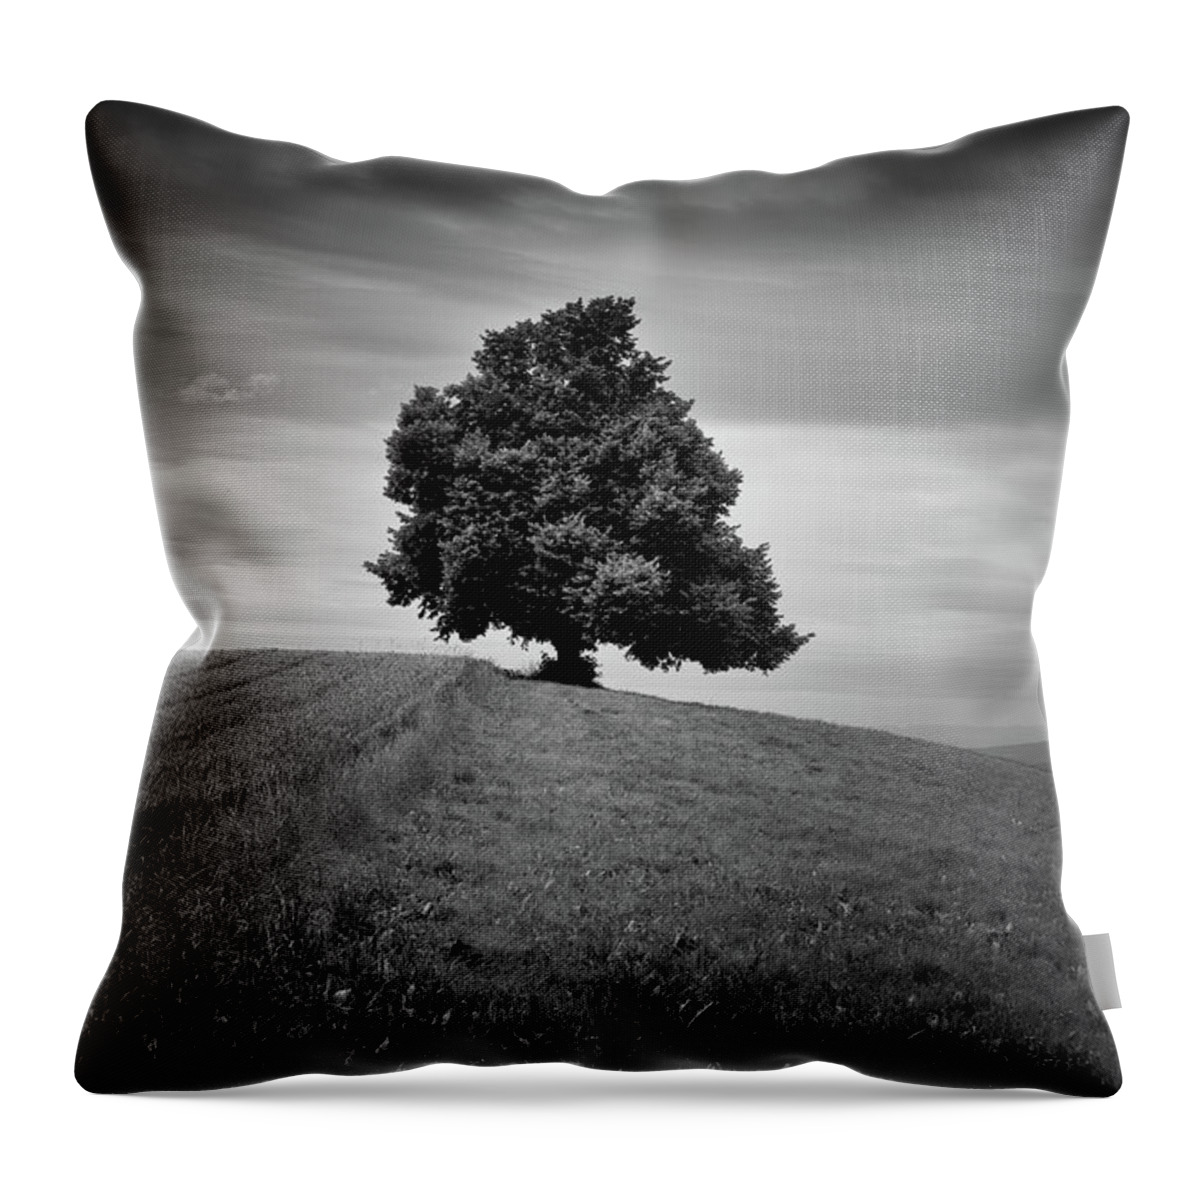 Zurich Throw Pillow featuring the photograph Single Tree In Fields by Tobias Gaulke